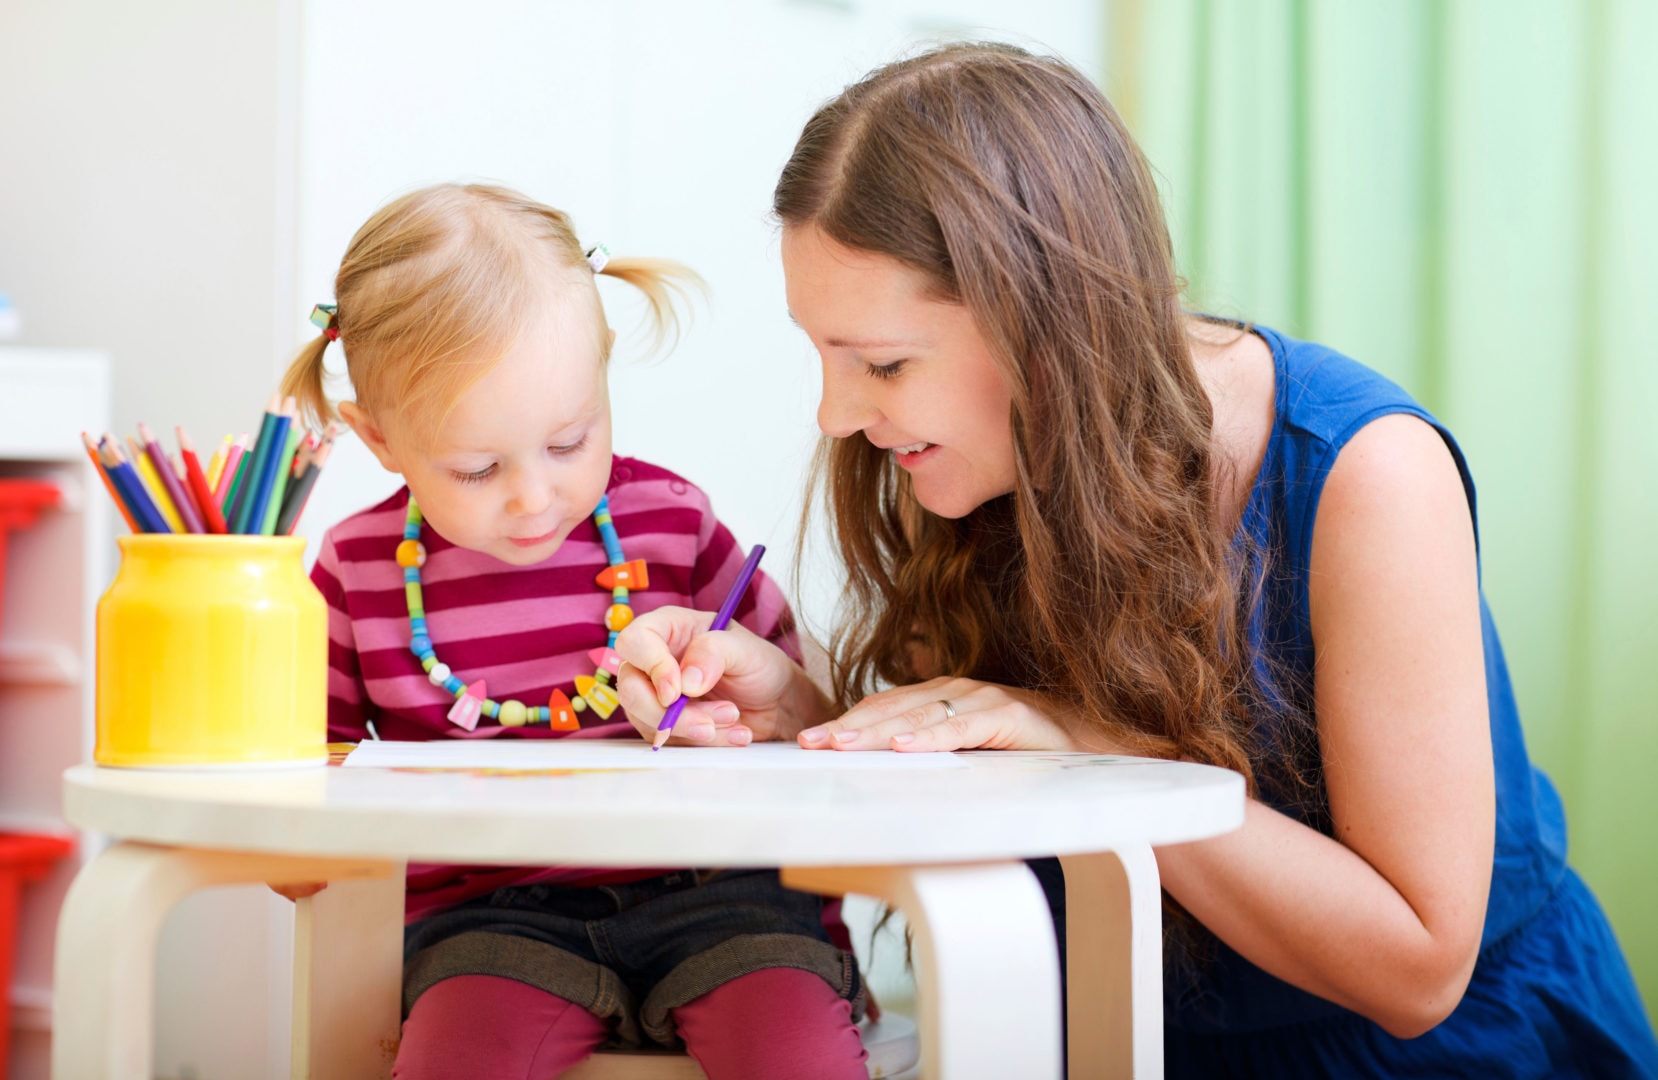 16 Tips for the First Day at Preschool